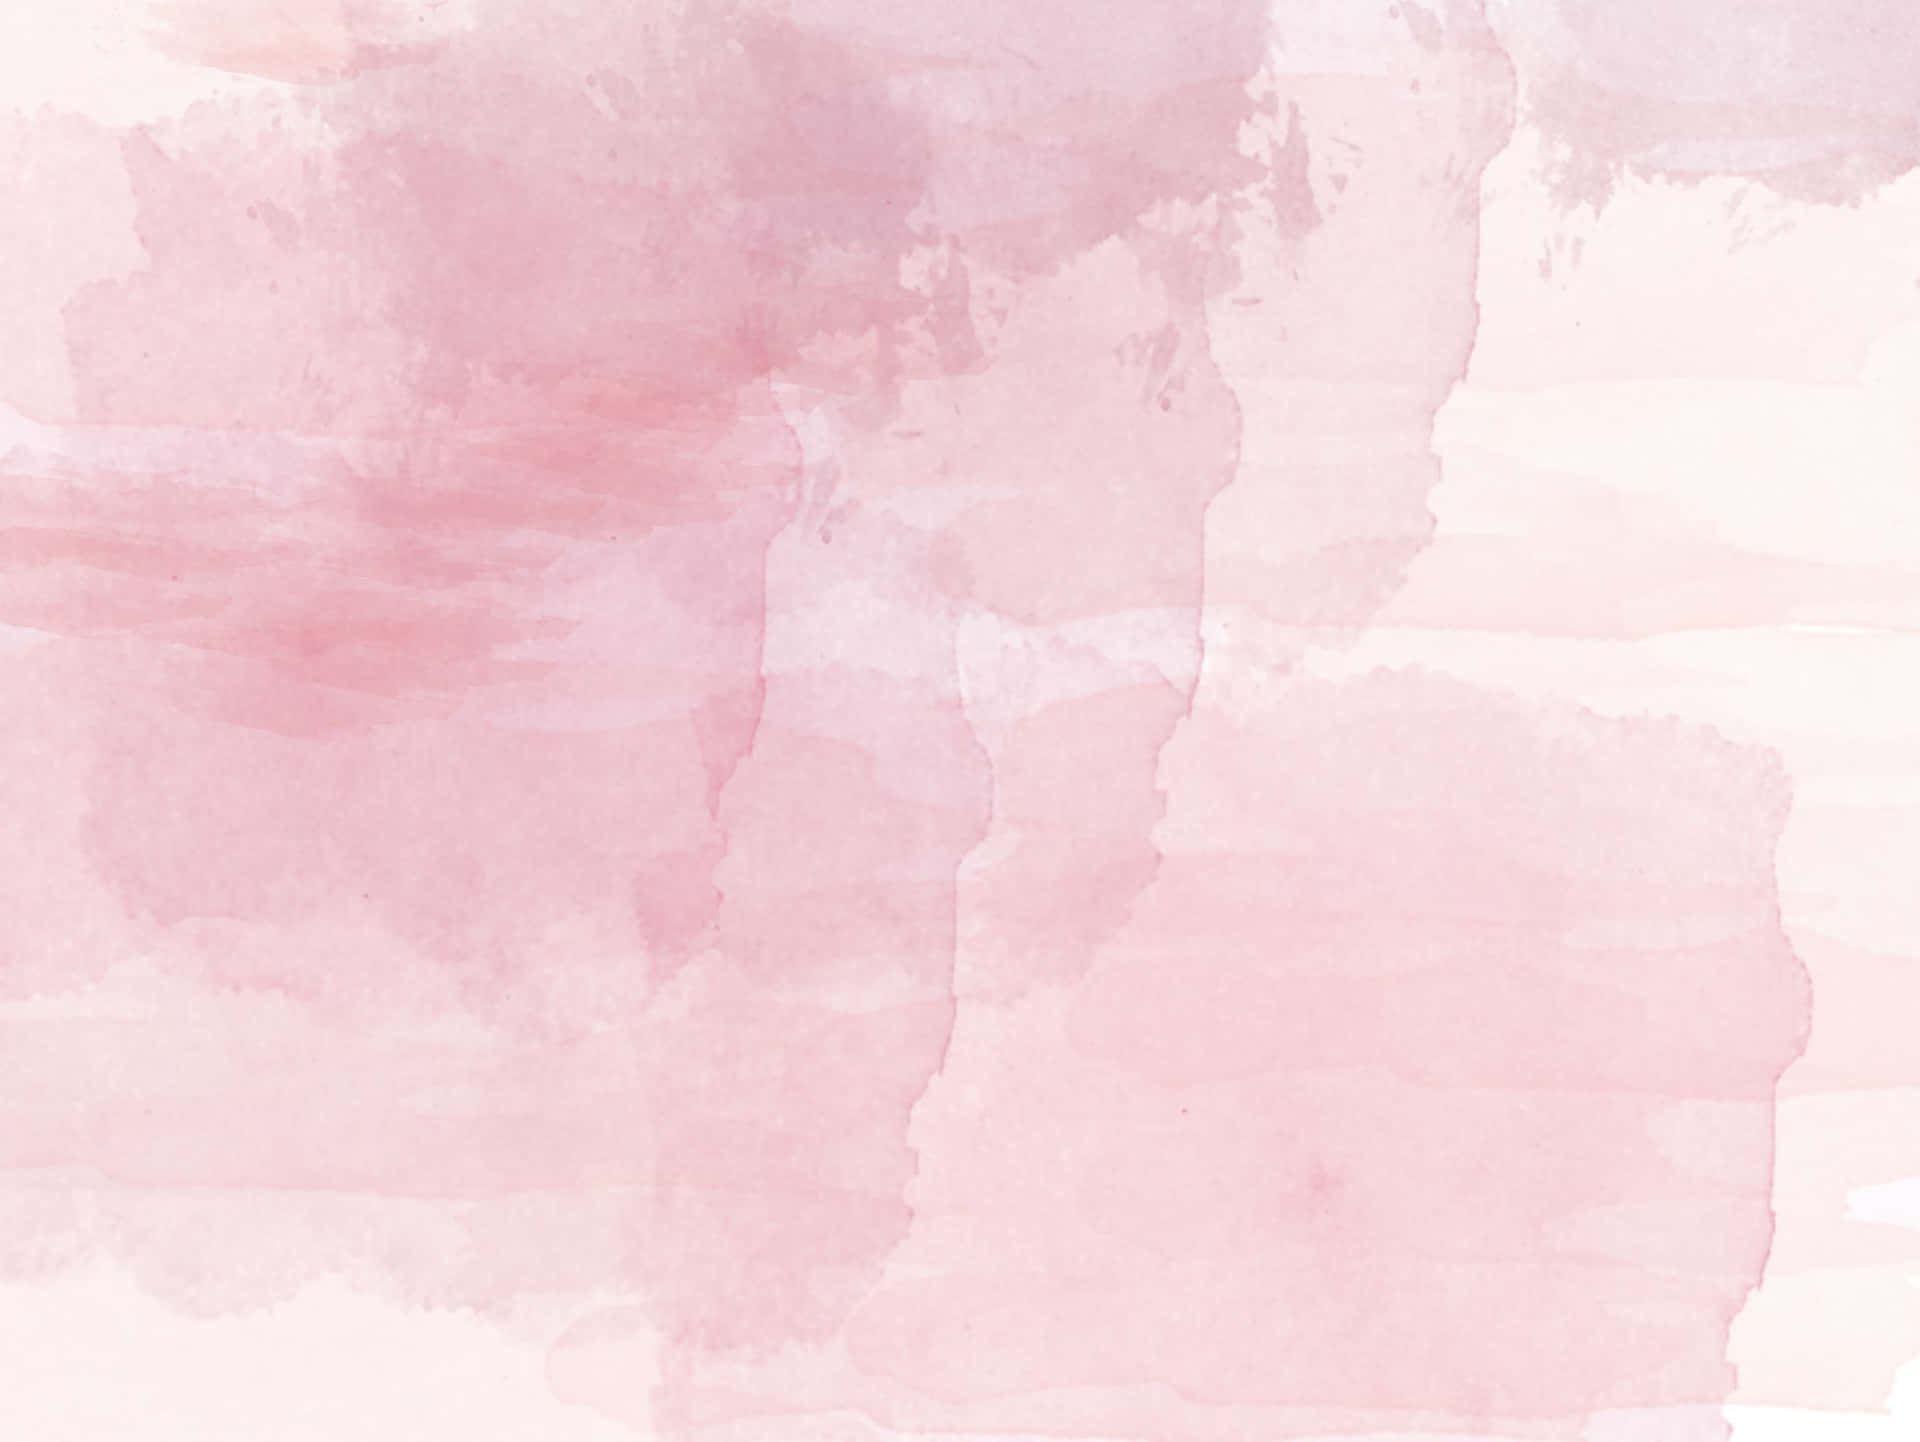 100+] Pink Abstract Backgrounds